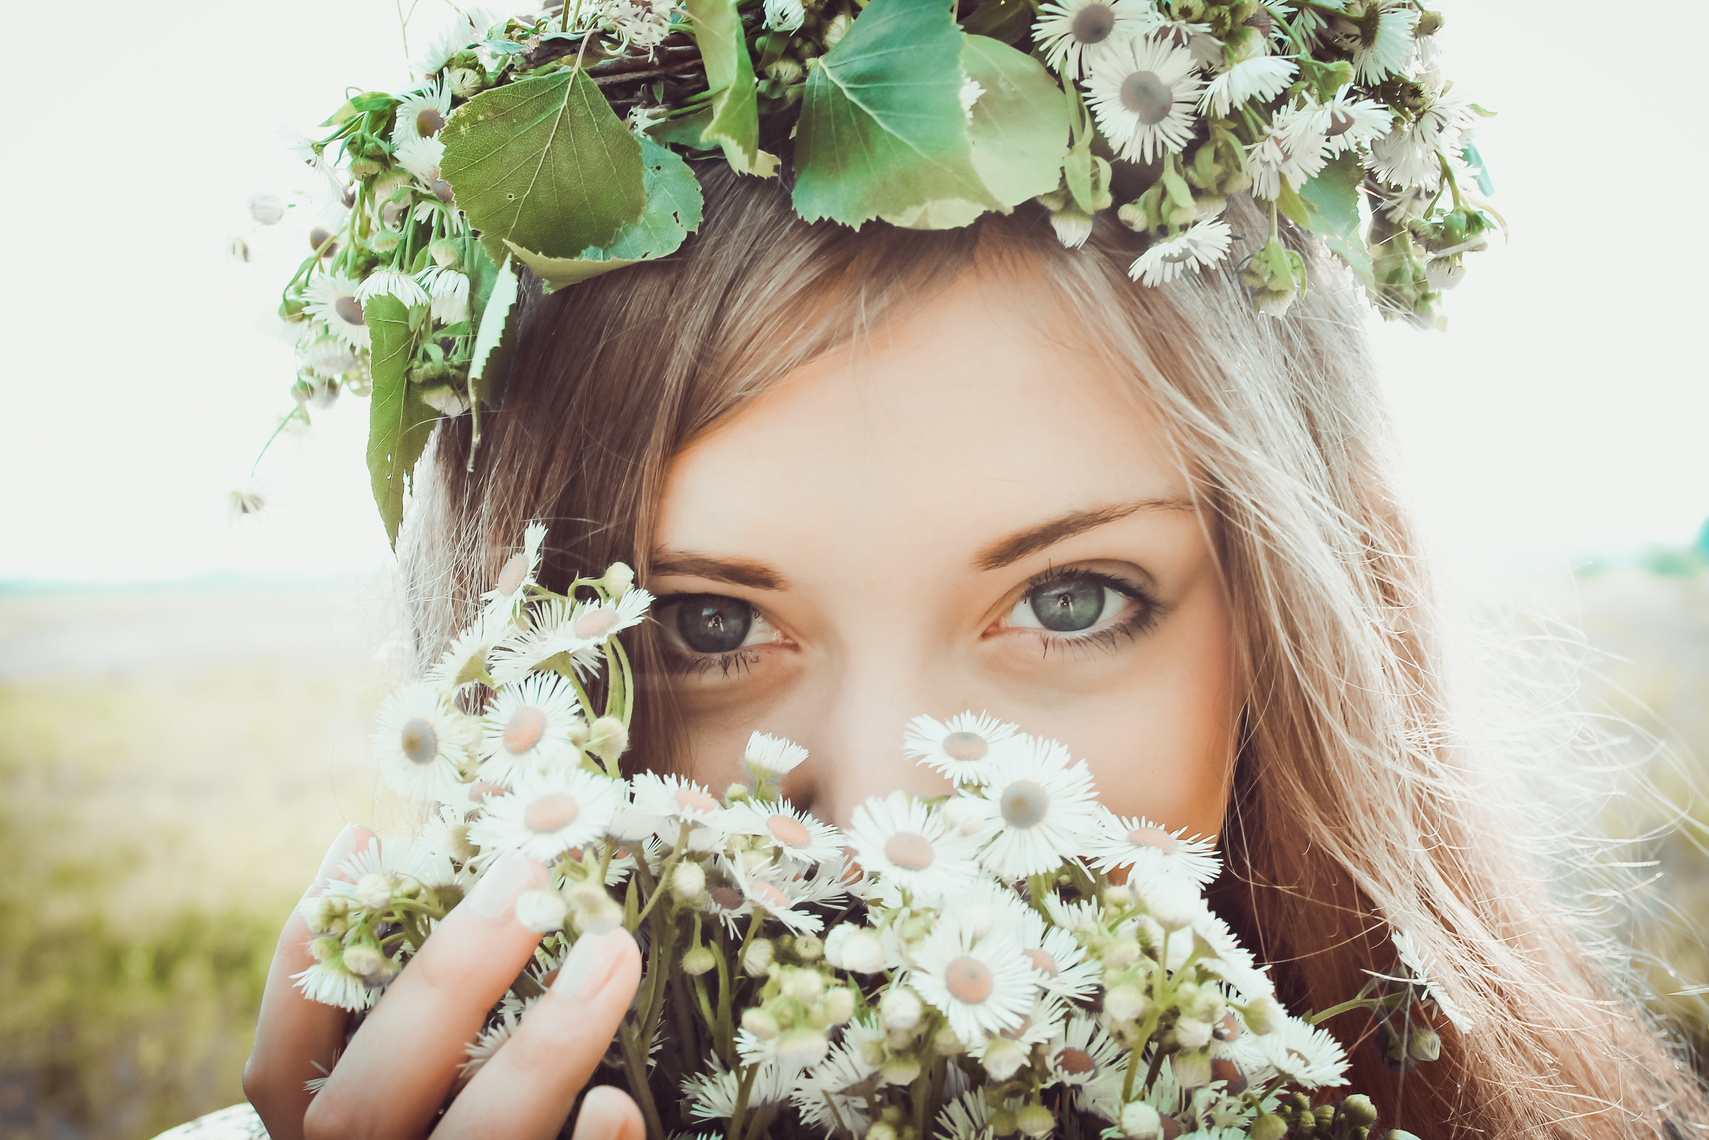 Photo of a Woman with a Flower Crown Holding White Flowers